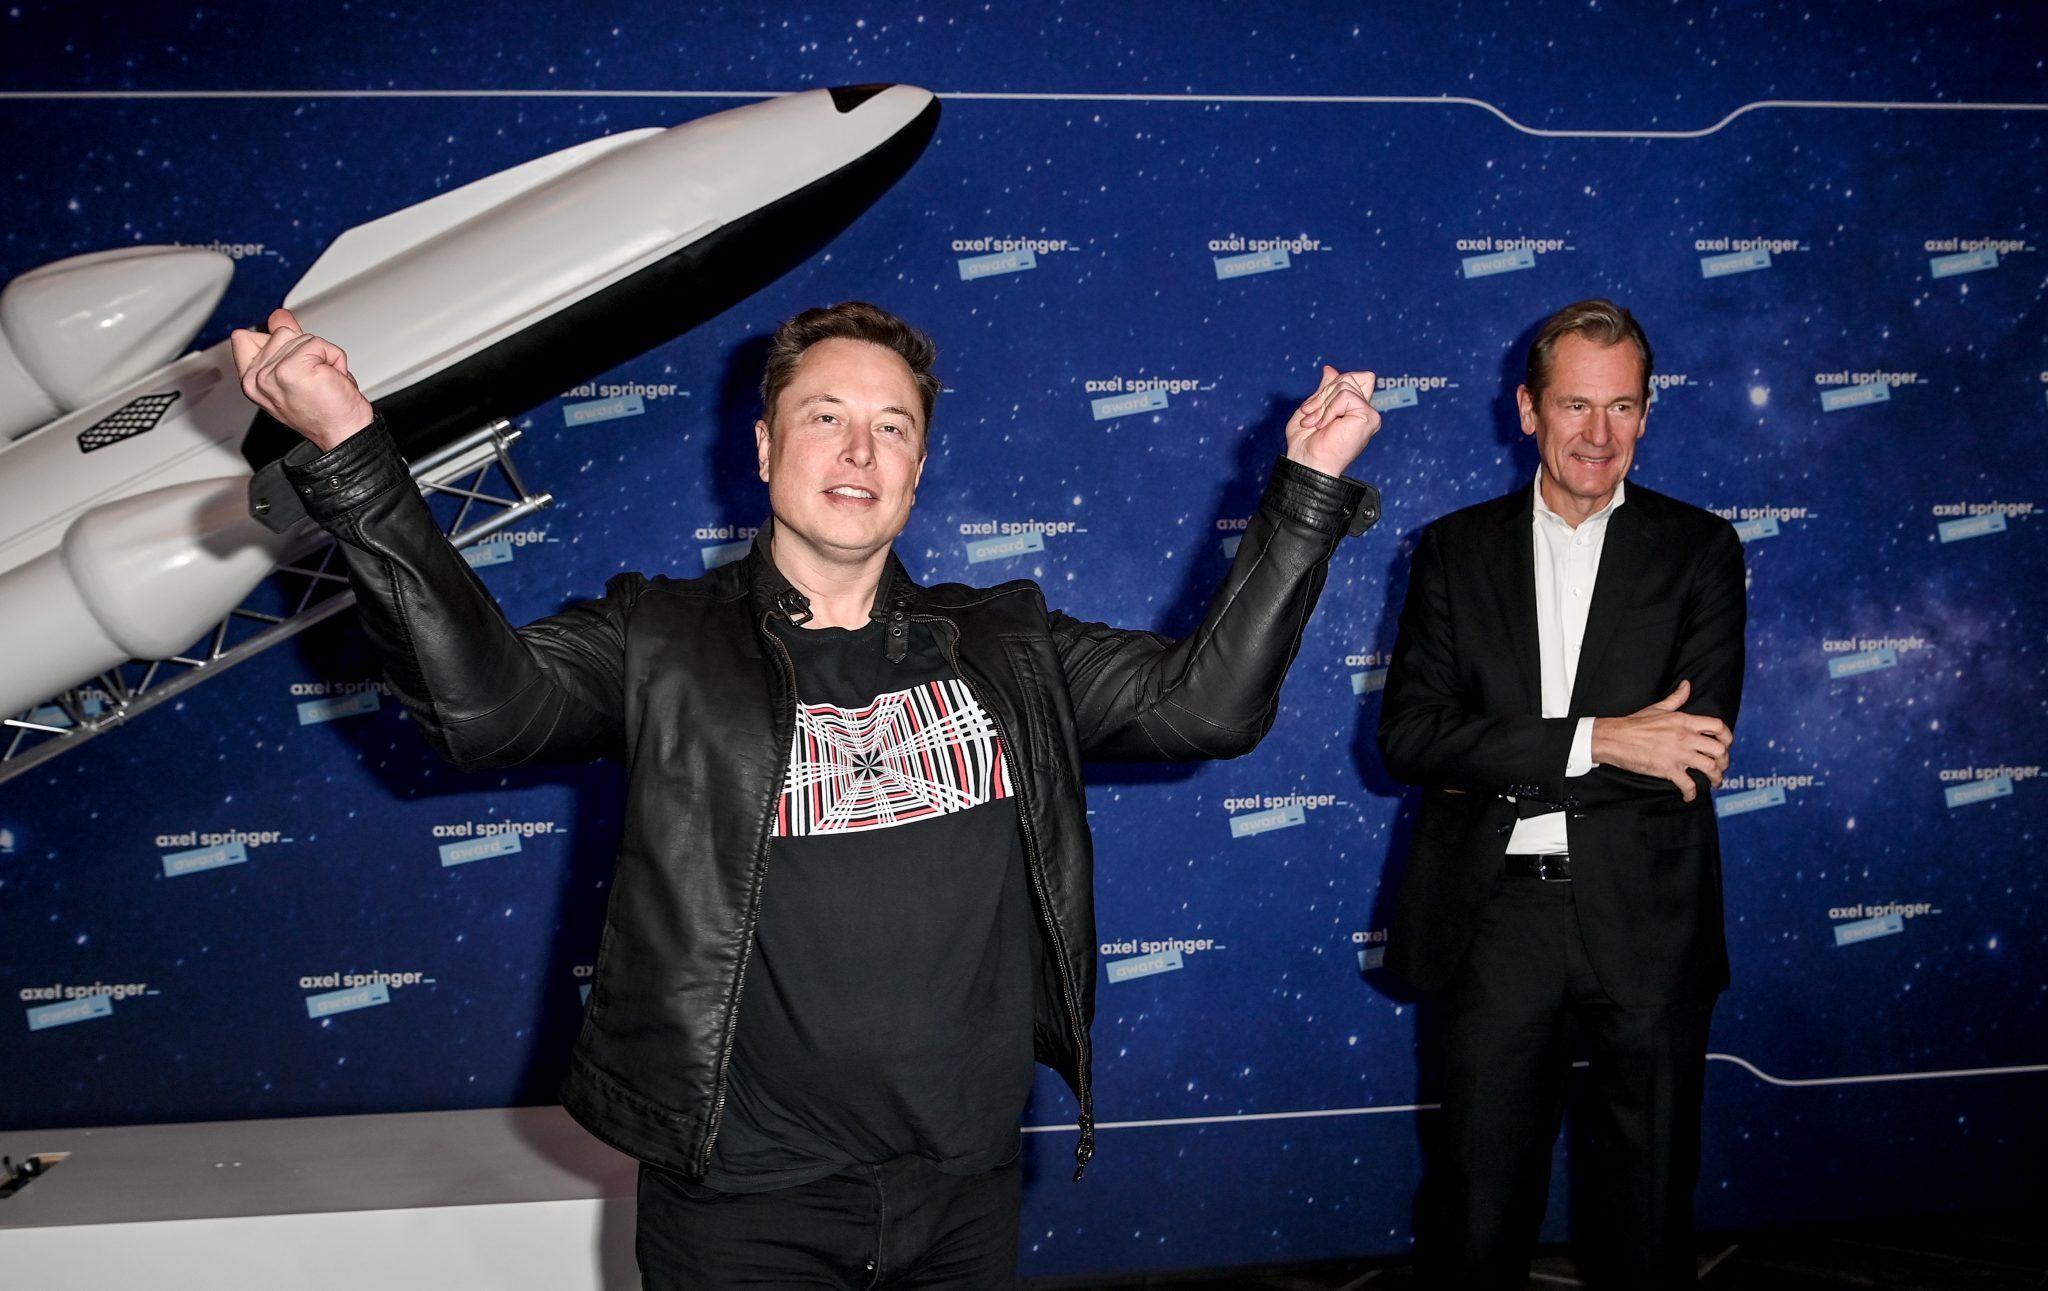 Spare a thought for Elon Musk this Easter, the billionaire doesn't even own his own home - apparently